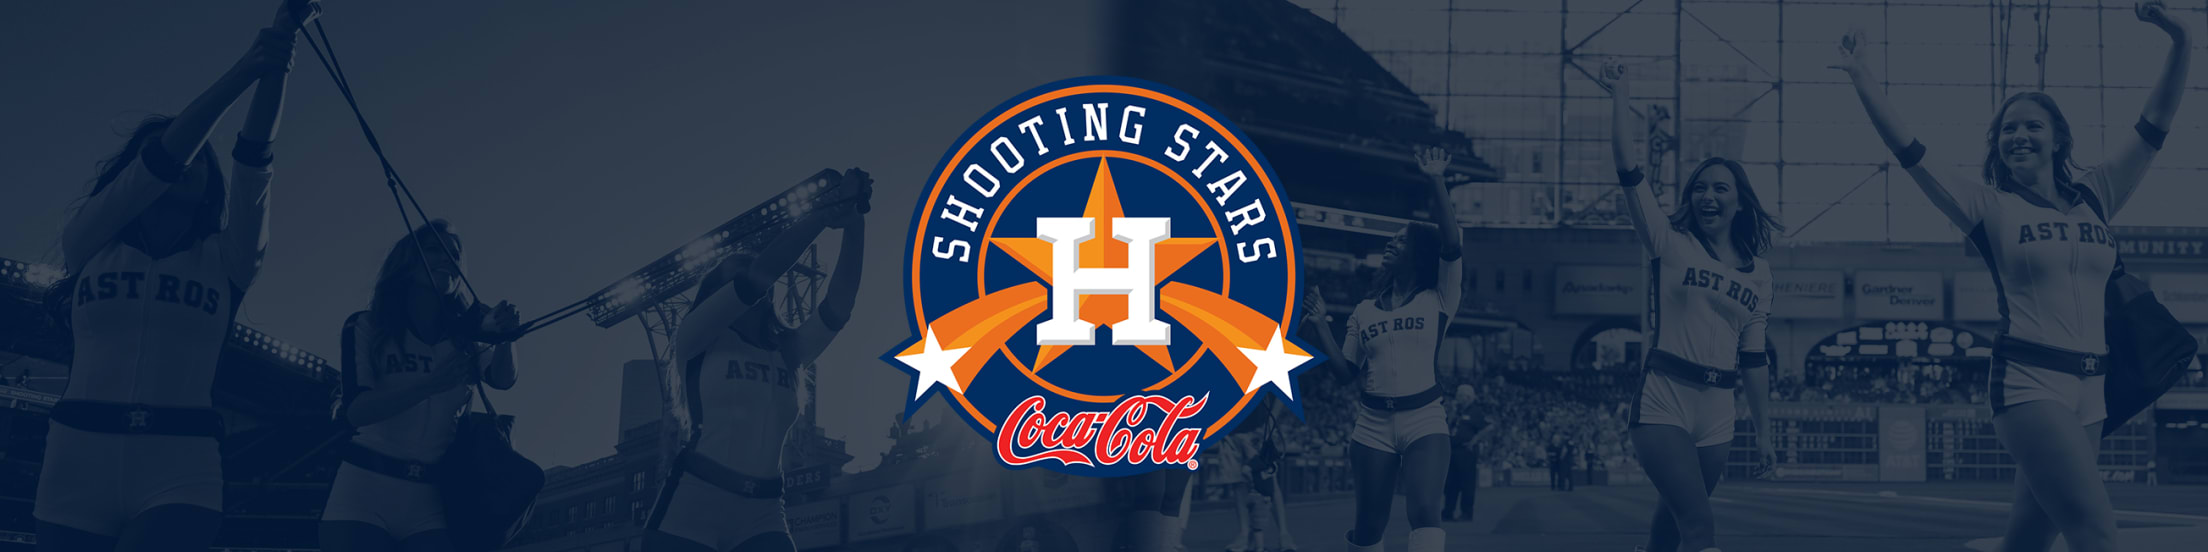 Member Astros Shooting Stars Performs During Editorial Stock Photo